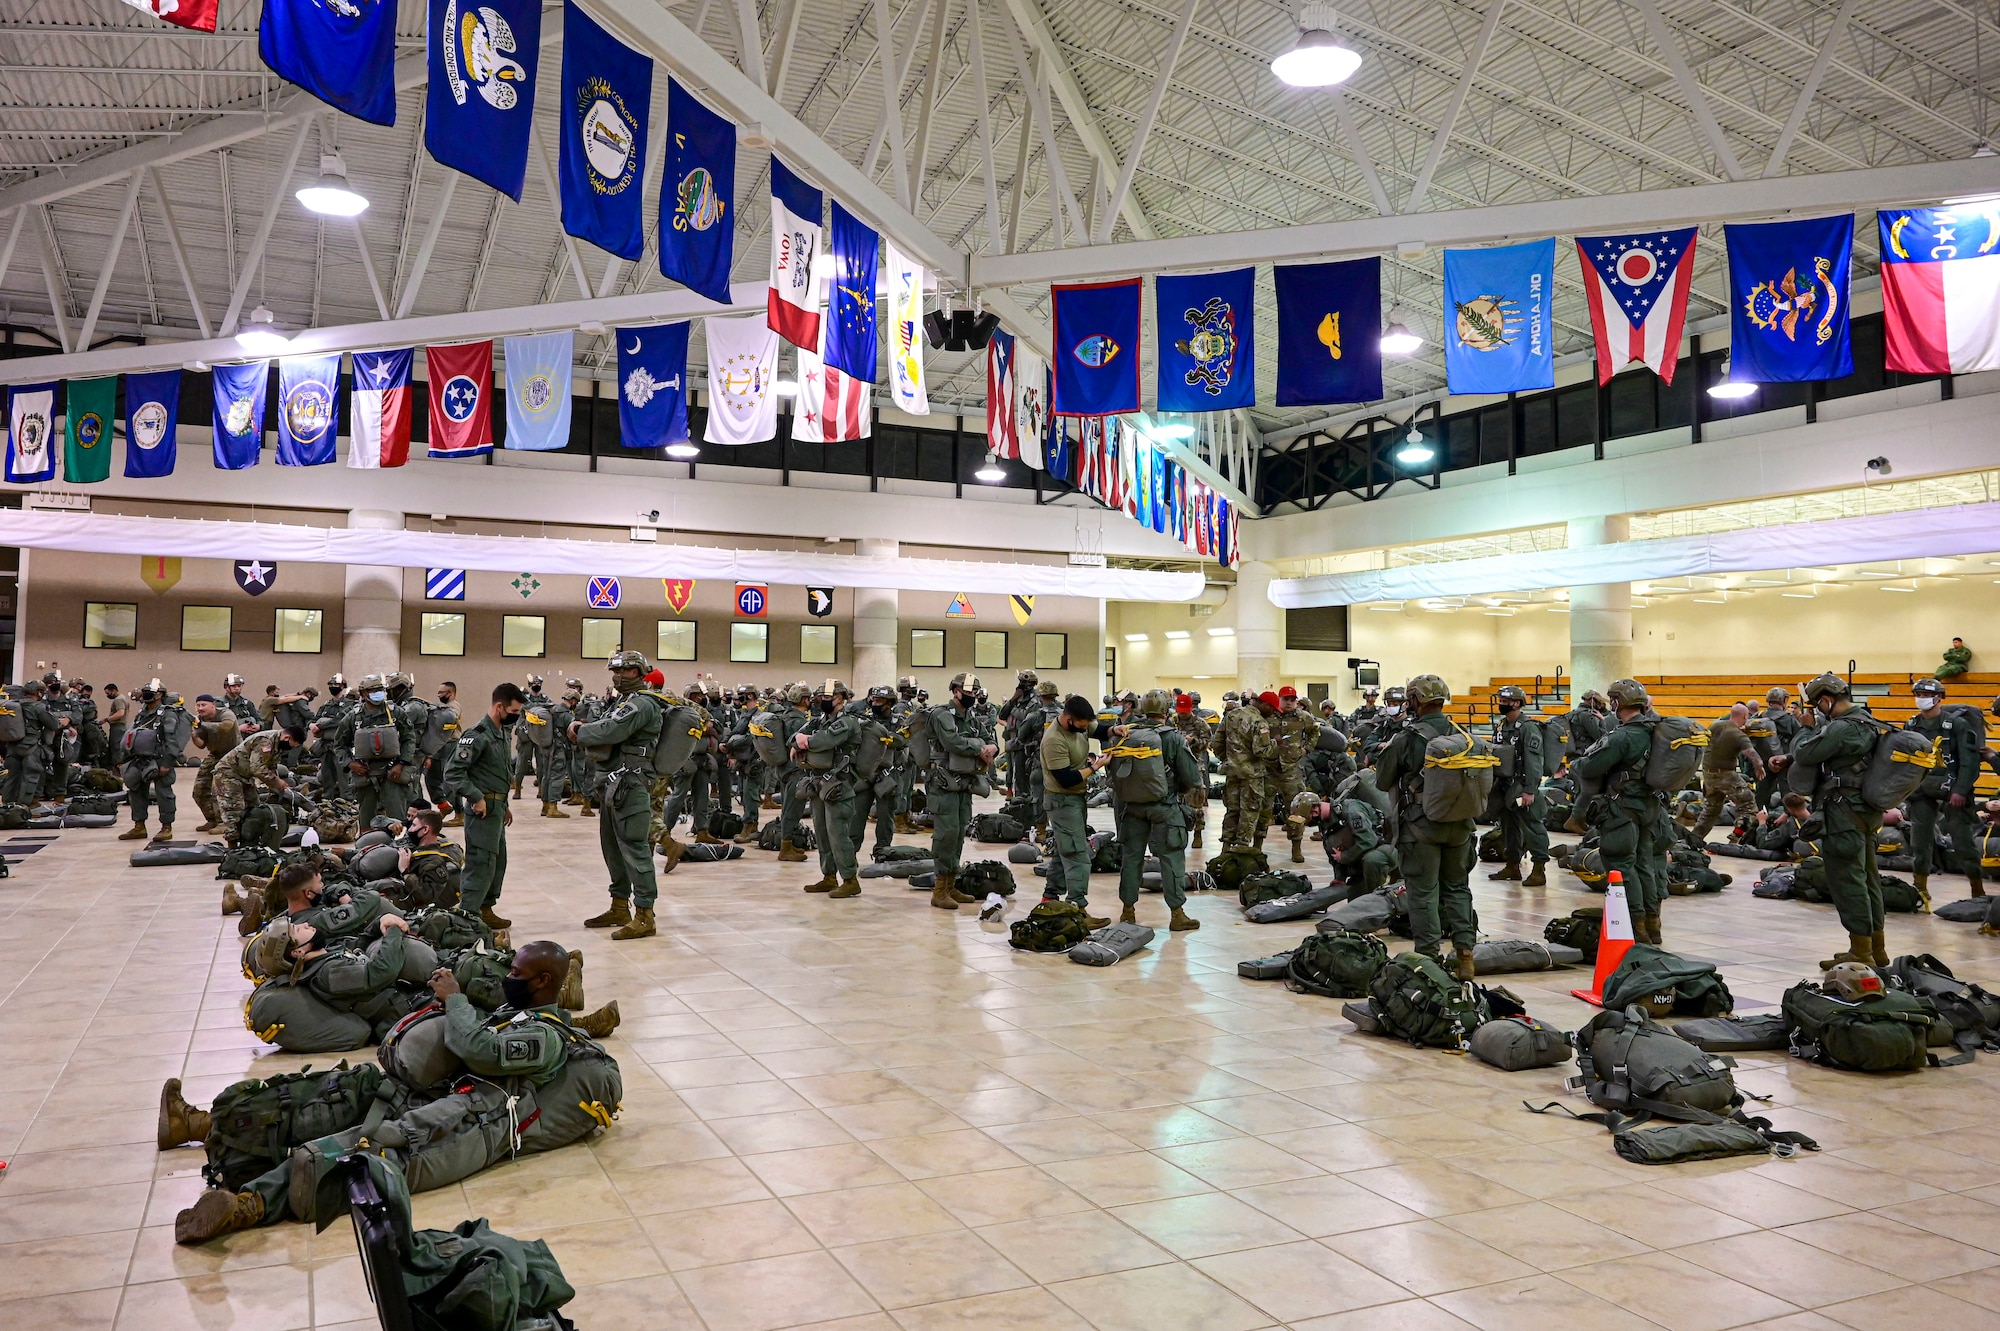 U.S. Army paratroopers with the 1st Battalion, 509th Infantry Regiment, prepare for an airborne exercise